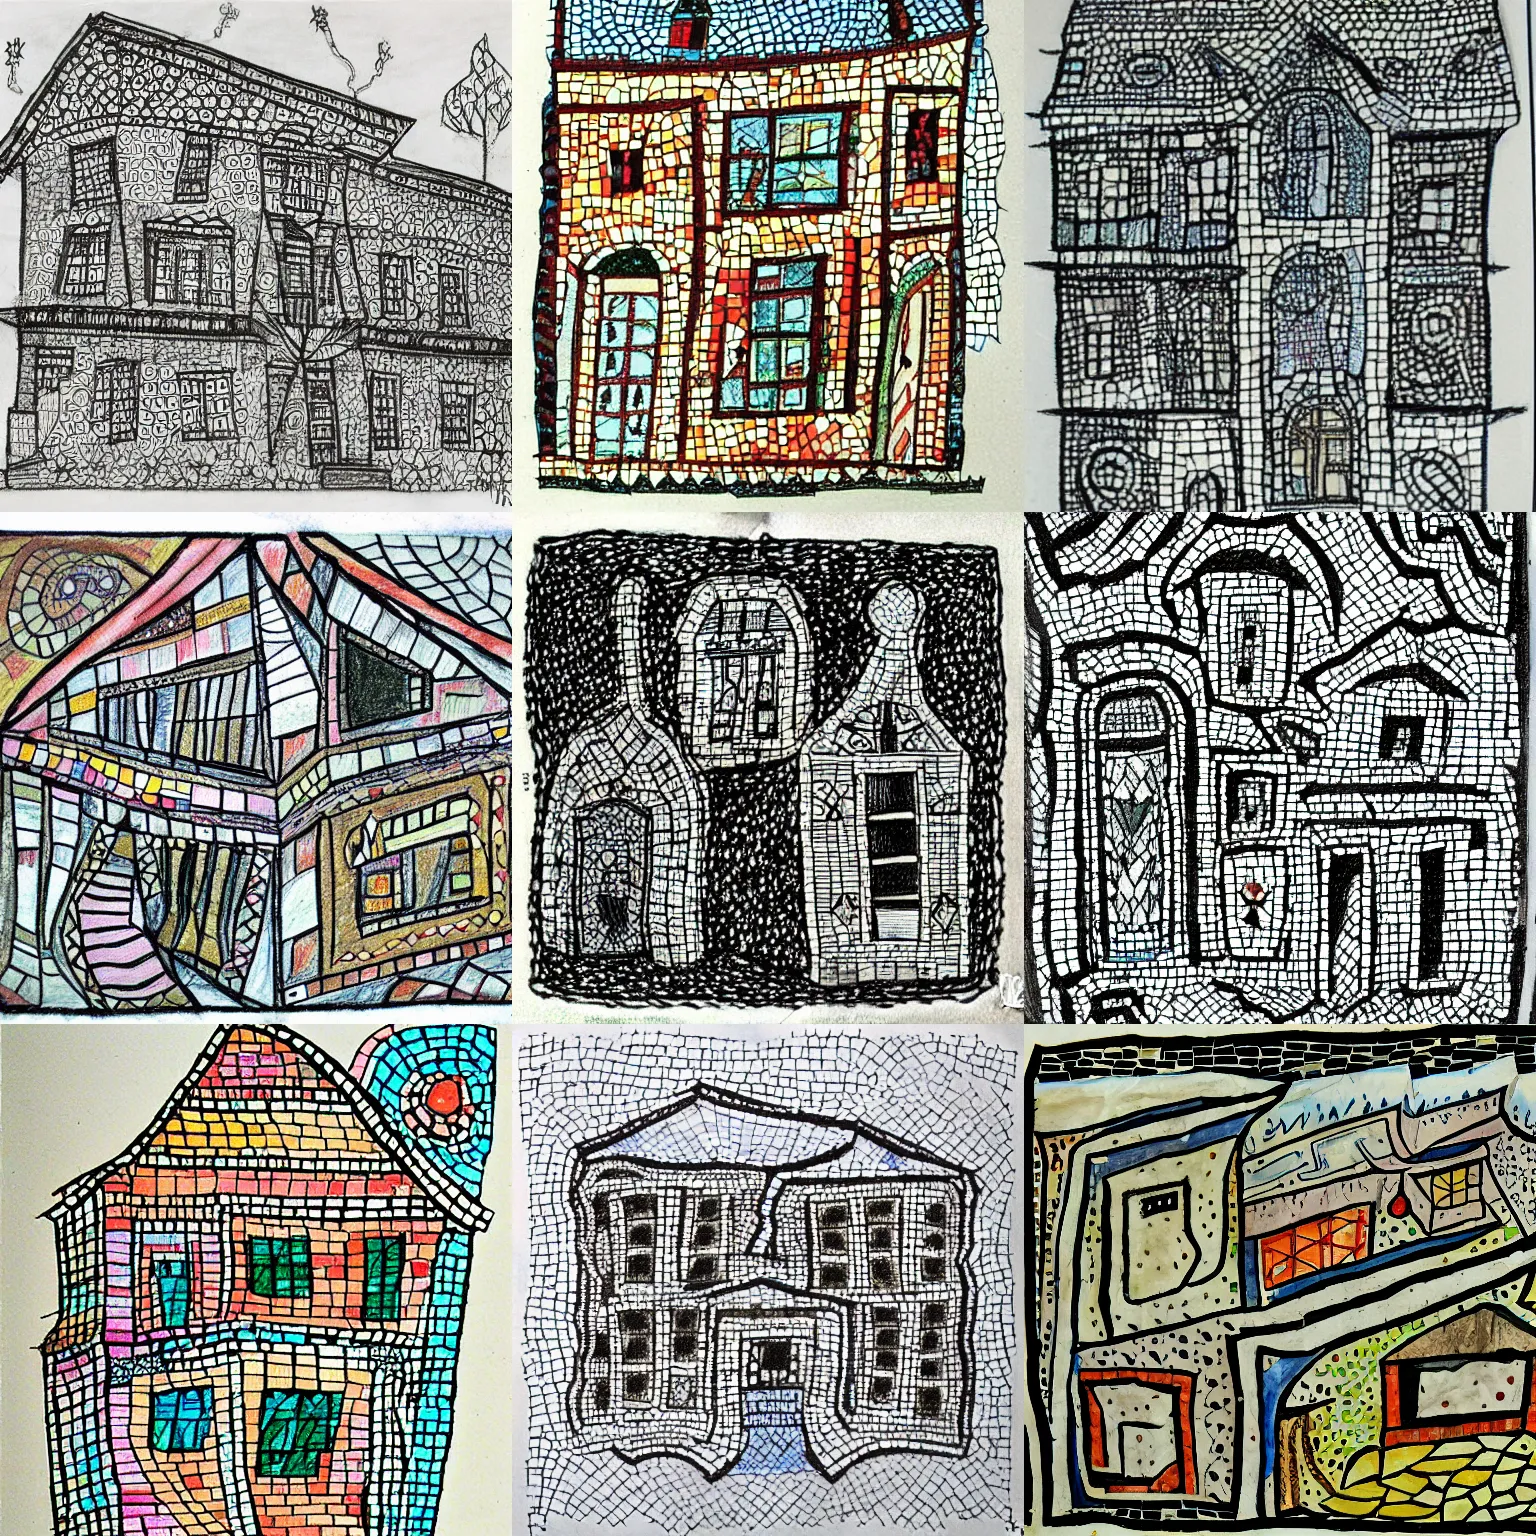 Prompt: dream journal art brut drawing of a fever dream about a house with mosaics on all of the walls, found doodled in a sketchbook